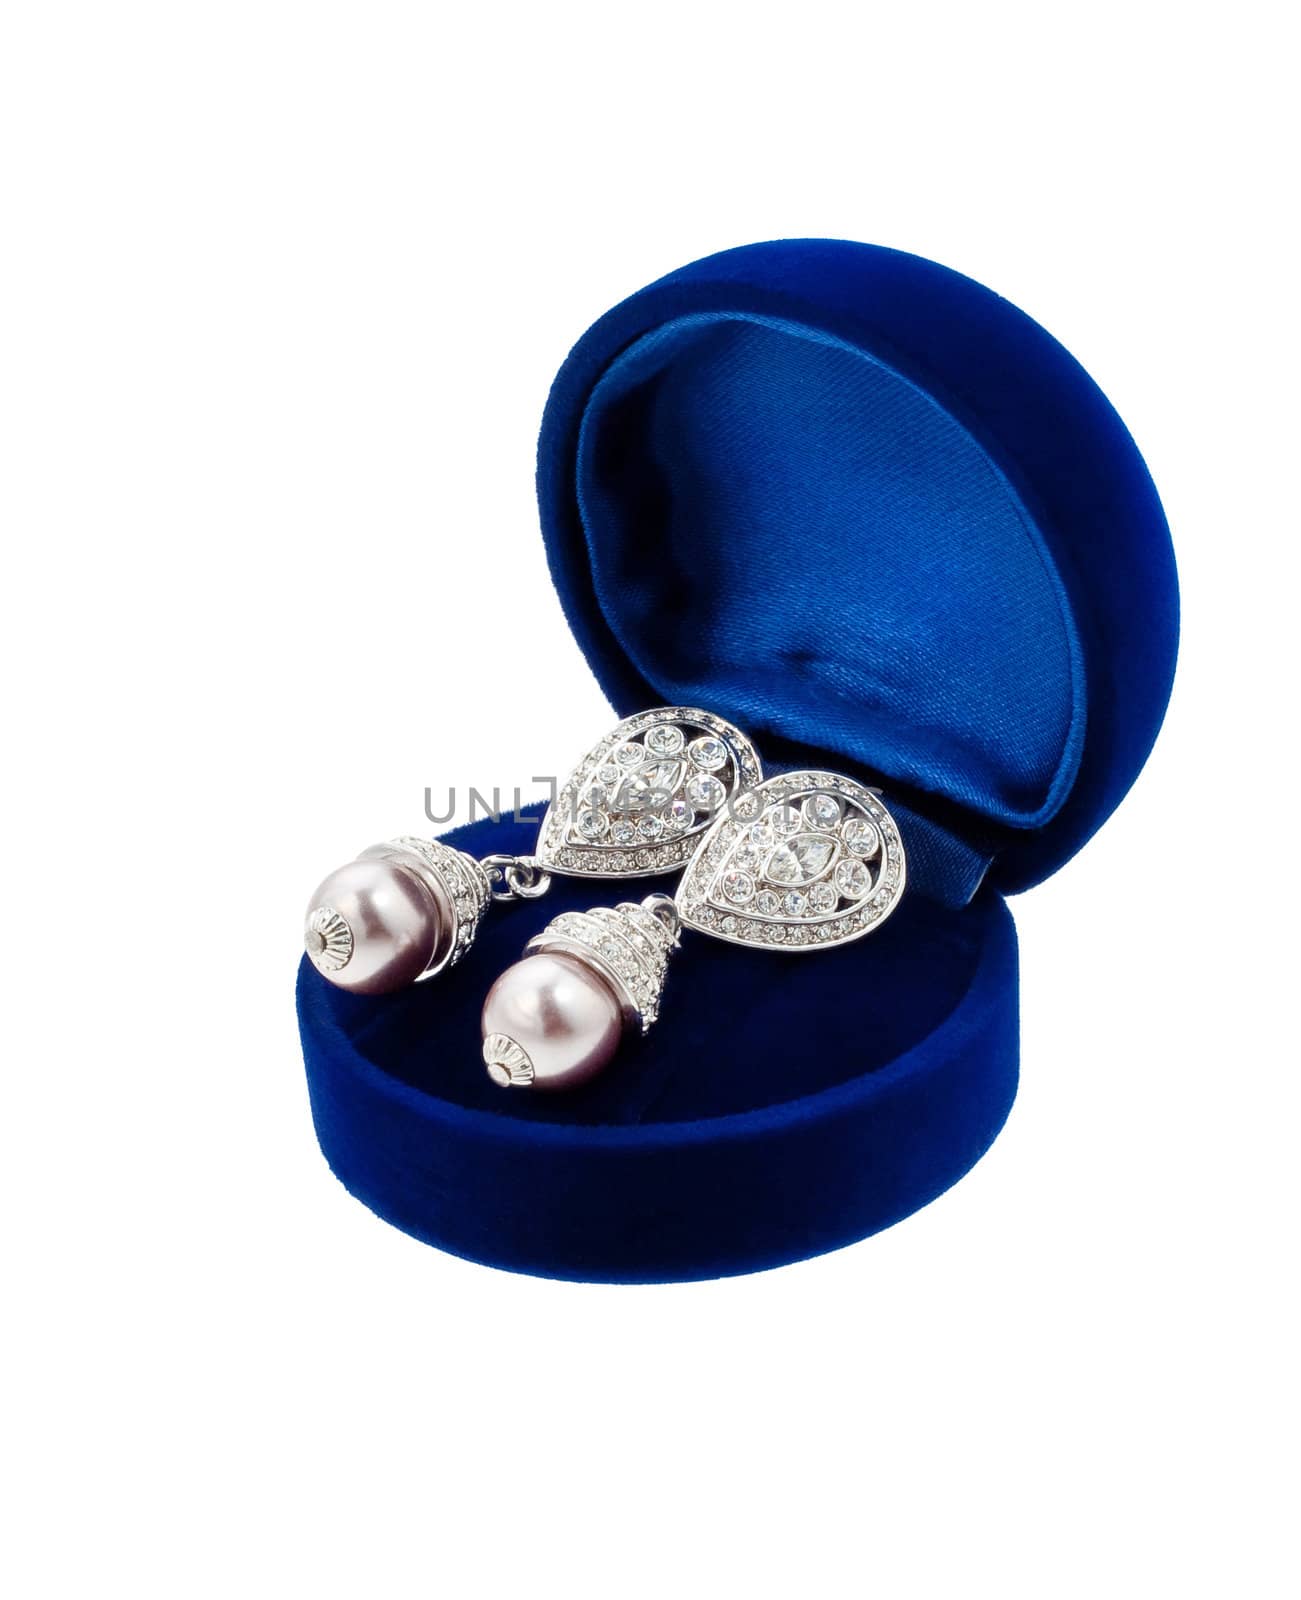 Pearl earring with diamonds in blue present box isolated